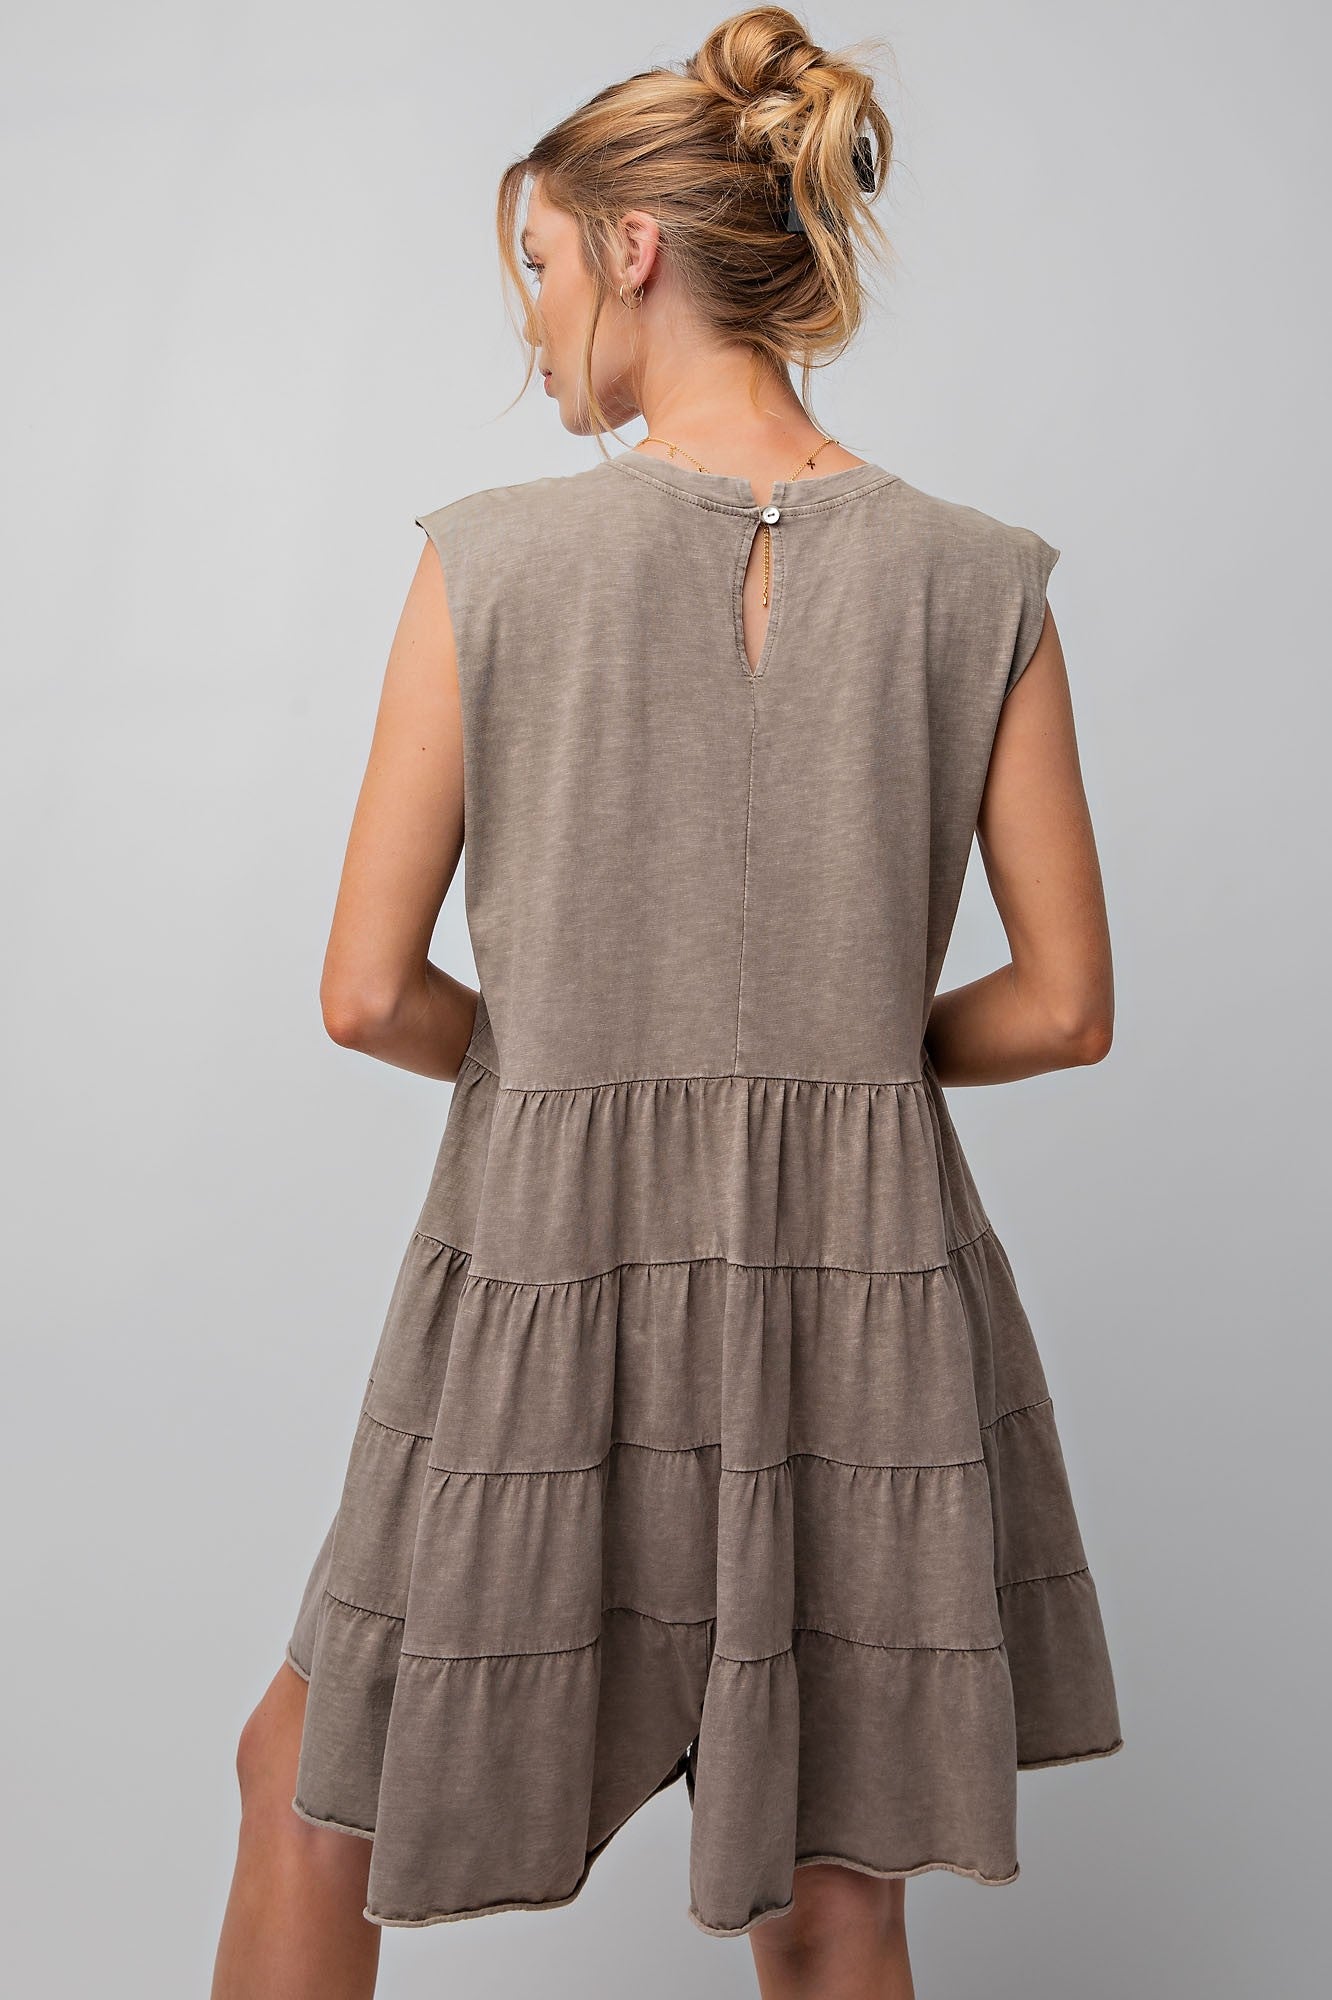 MINERAL WASHED SLEEVELESS ROMPER